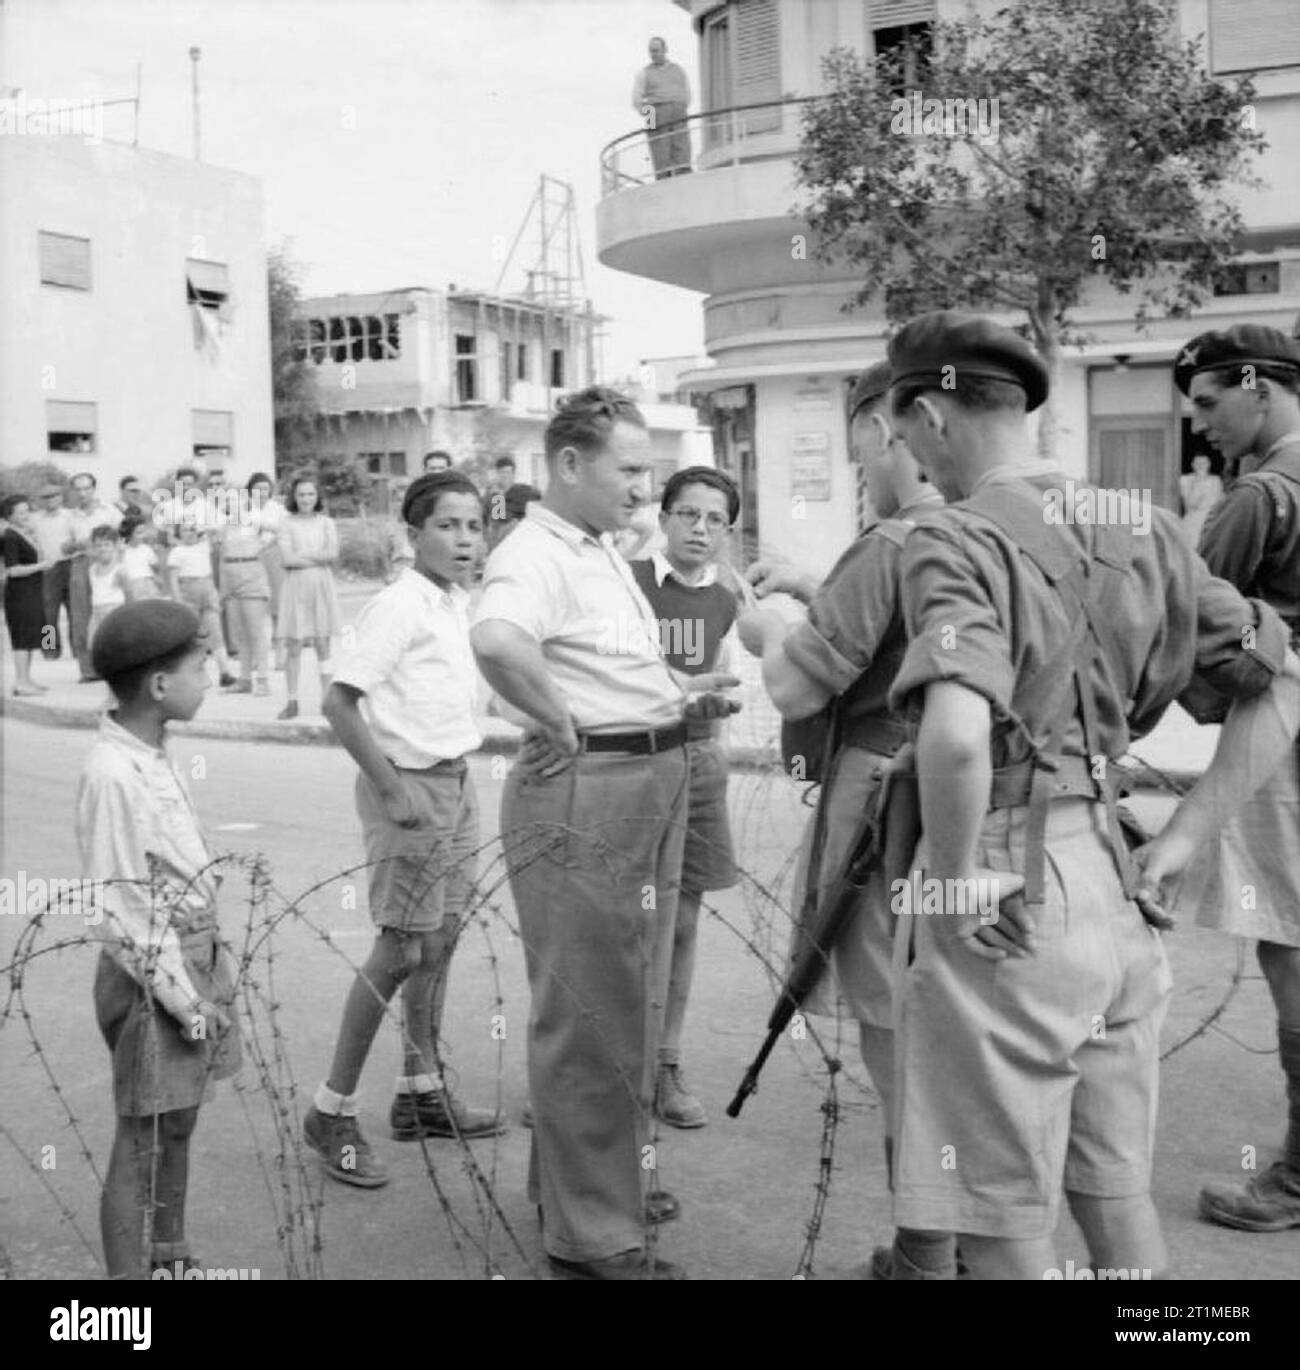 https://c8.alamy.com/comp/2T1MEBR/the-british-mandate-in-palestine-1917-1948-members-of-the-6th-airborne-division-checking-the-identity-of-persons-on-the-streets-of-tel-aviv-in-an-attempt-to-restore-order-after-disturbances-which-broke-out-on-14-november-1945-2T1MEBR.jpg